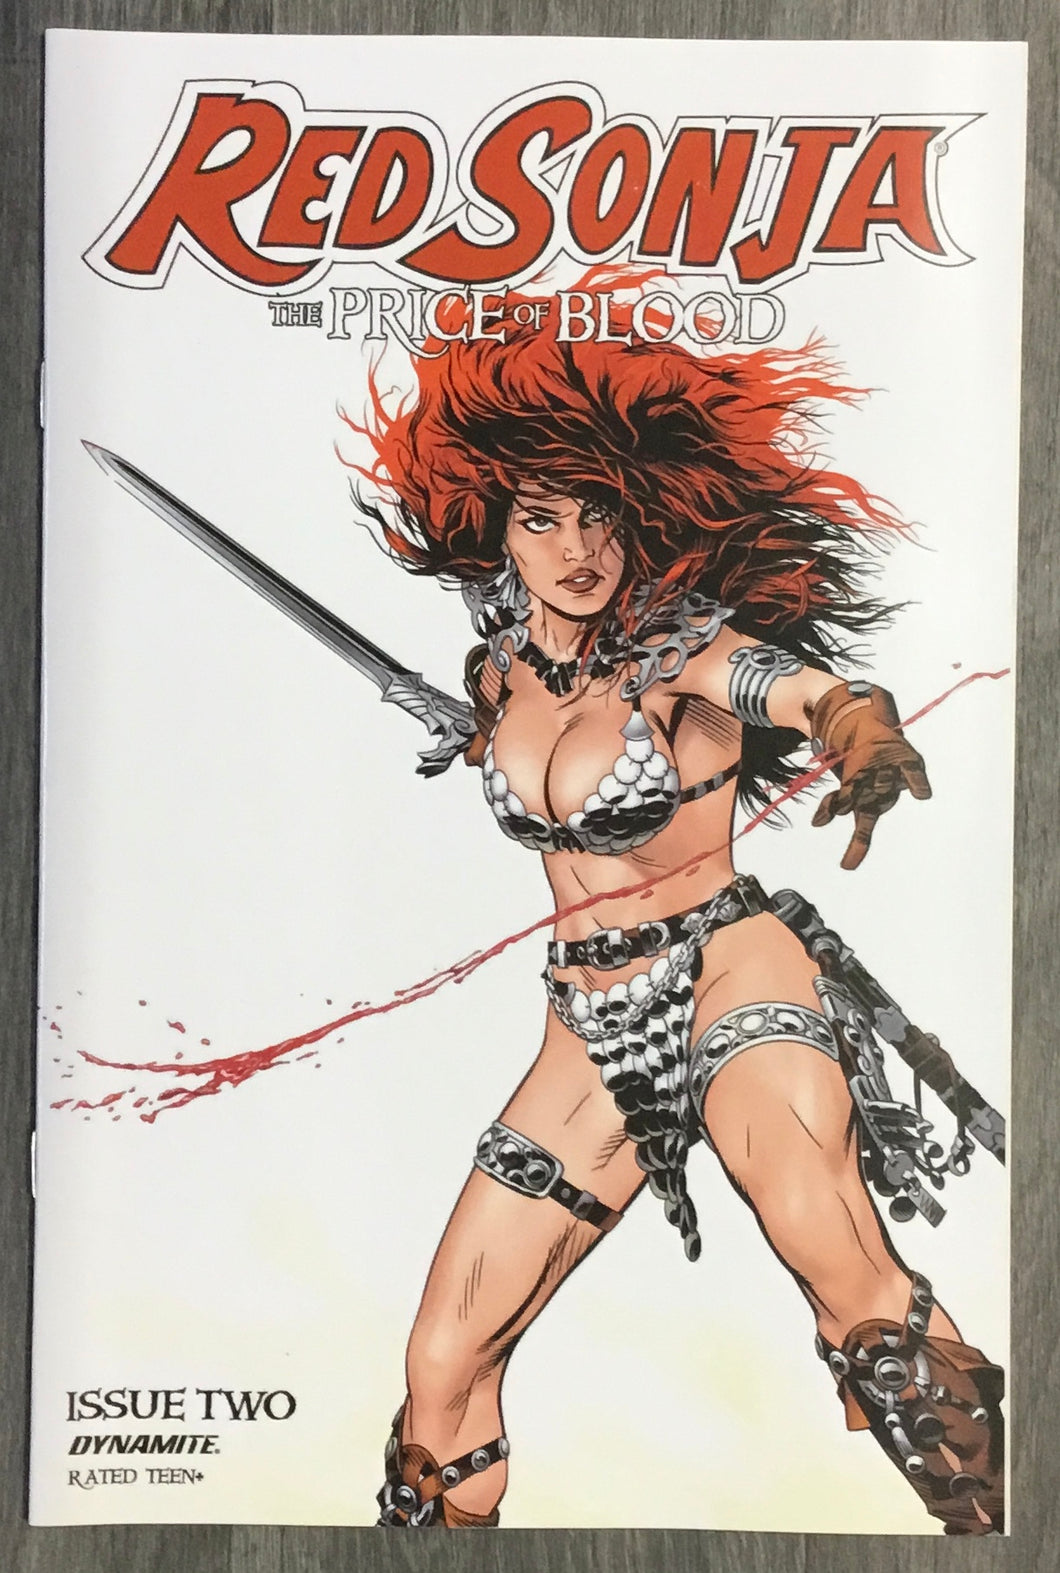 Red Sonja: The Price of Blood No. #2(B) 2020 Dynamite Comics